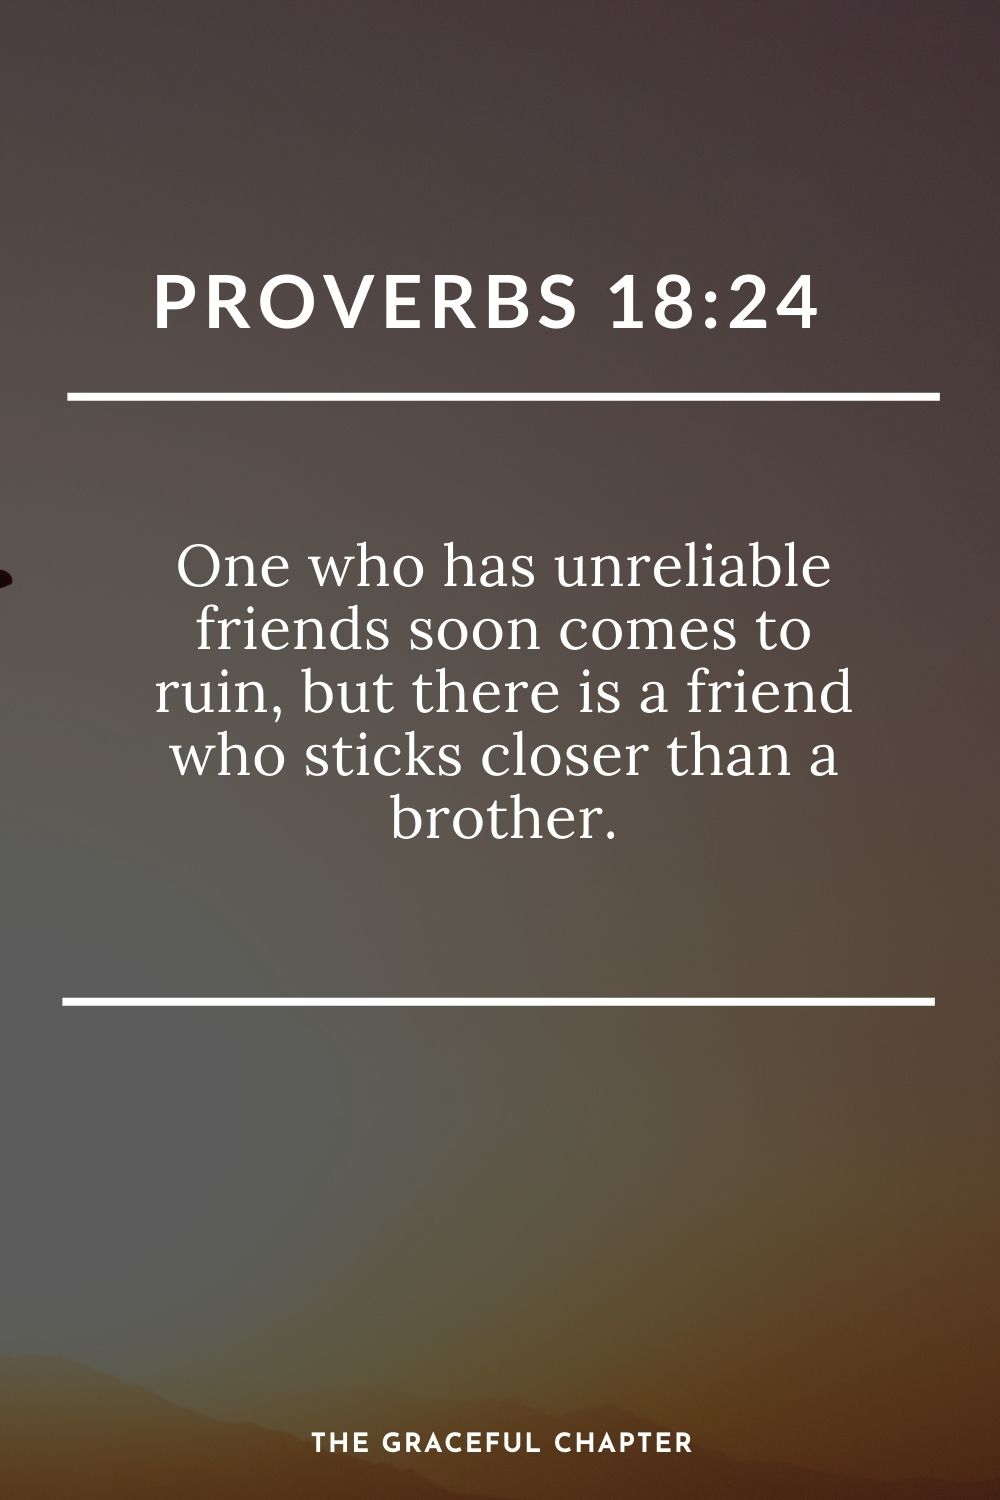 One who has unreliable friends soon comes to ruin, but there is a friend who sticks closer than a brother. Proverbs 18:24